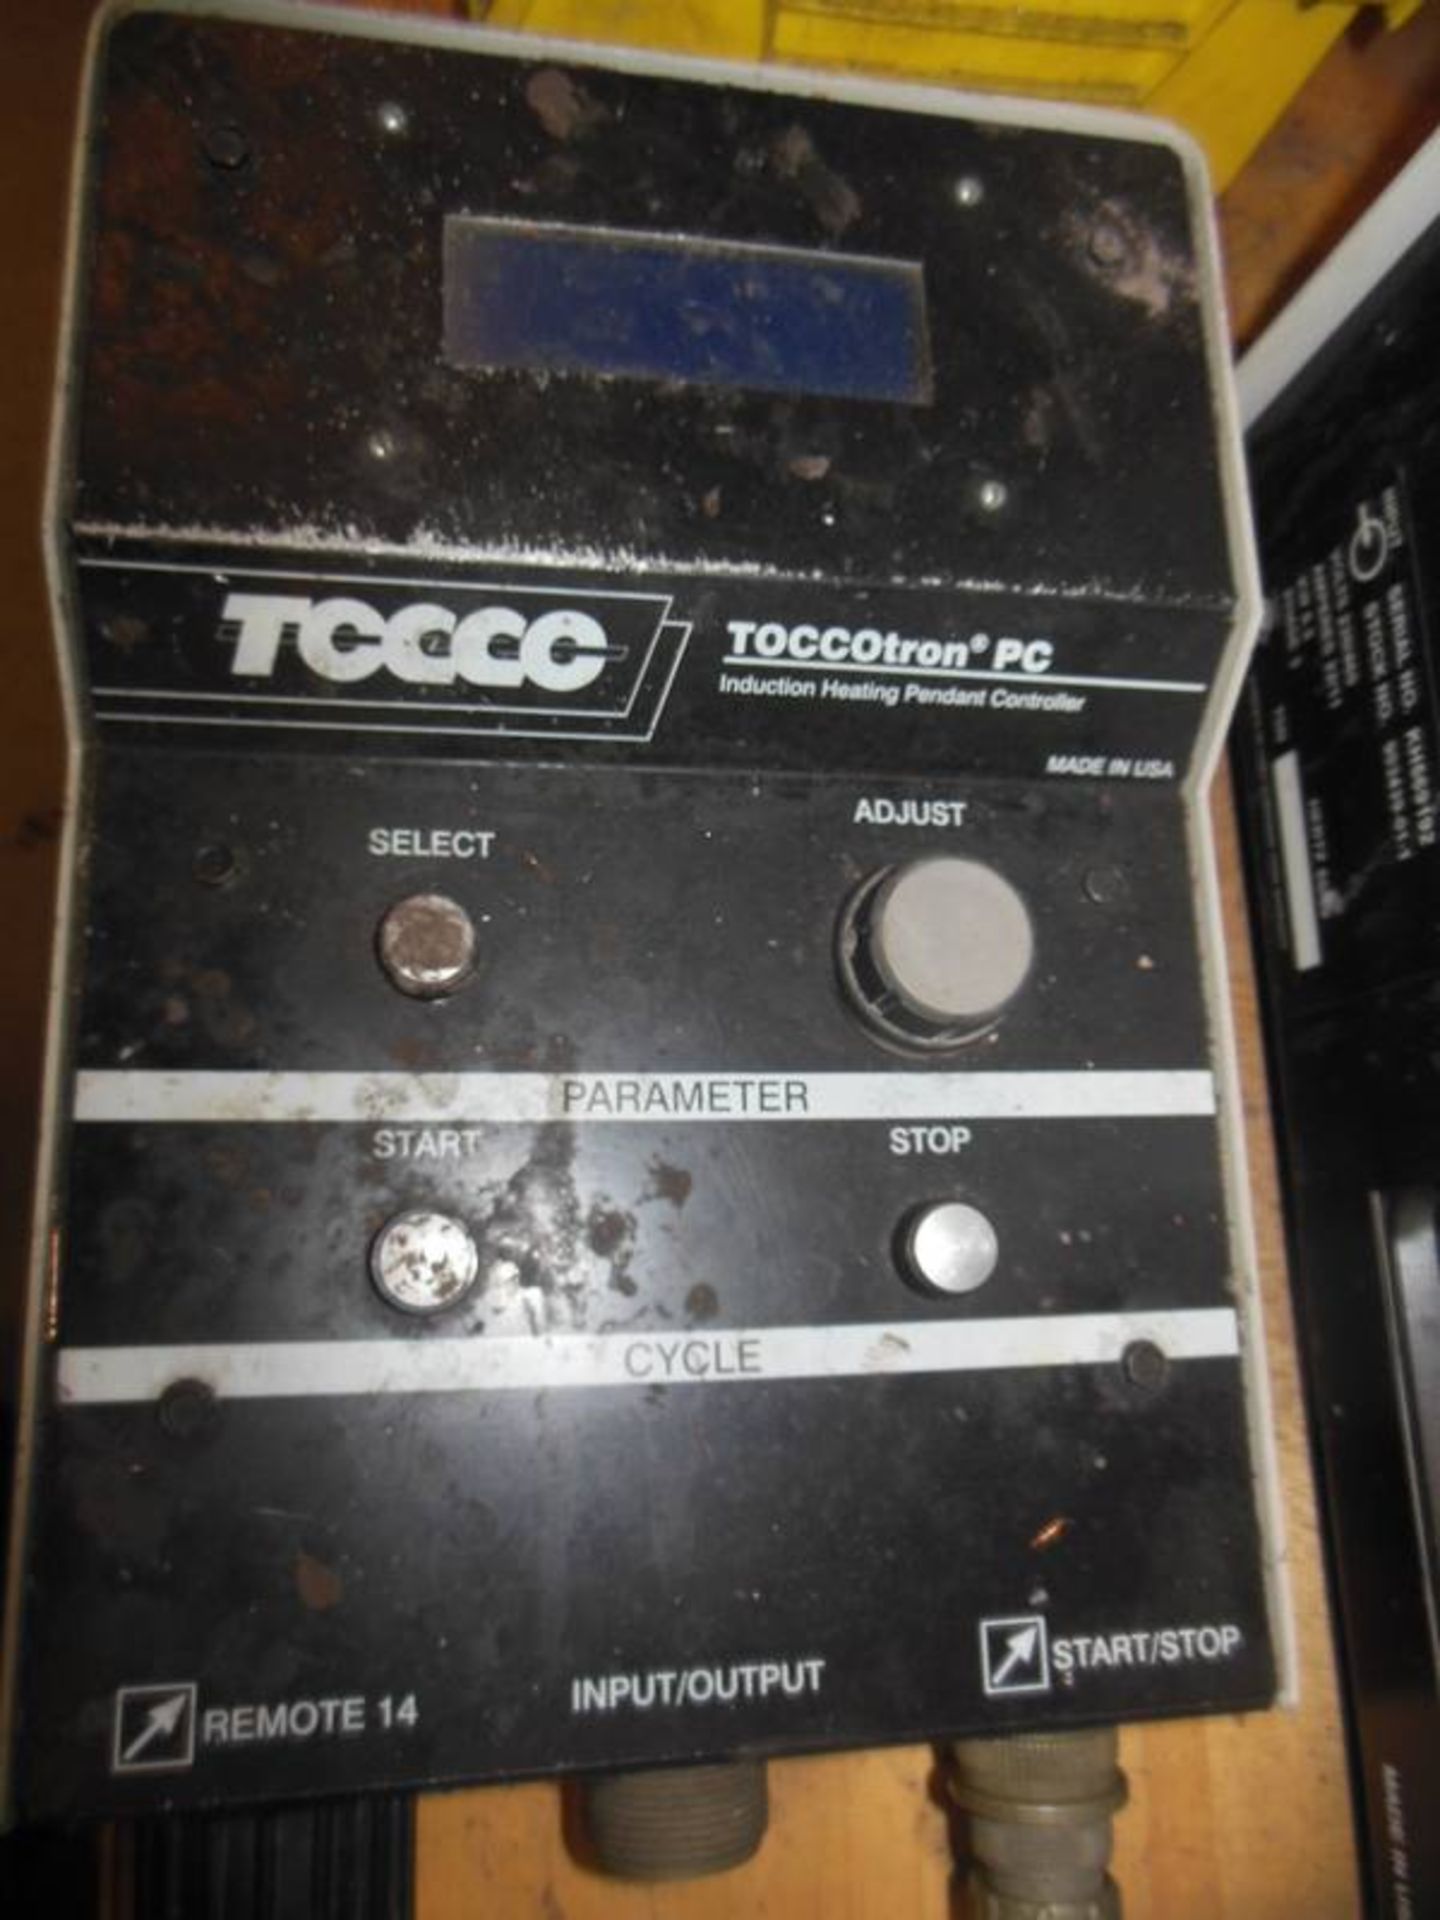 Tocco Model 903439-01-1 Induction Hardener AC Power Supply; Serial Number: KH569192; with Oendant - Image 2 of 4